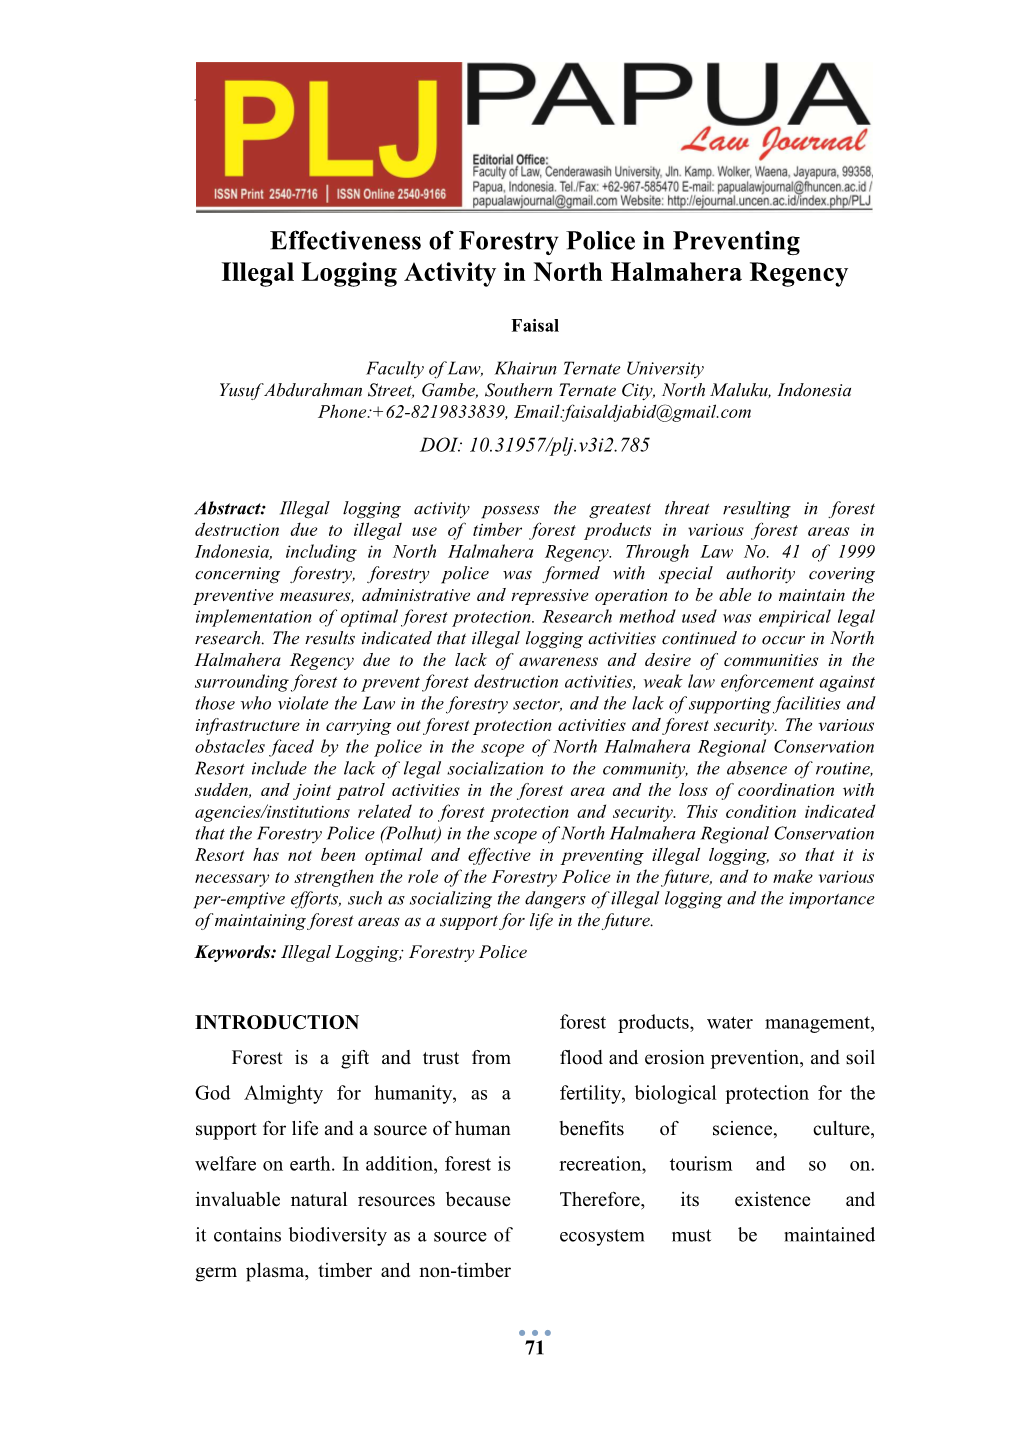 Effectiveness of Forestry Police in Preventing Illegal Logging Activity in North Halmahera Regency